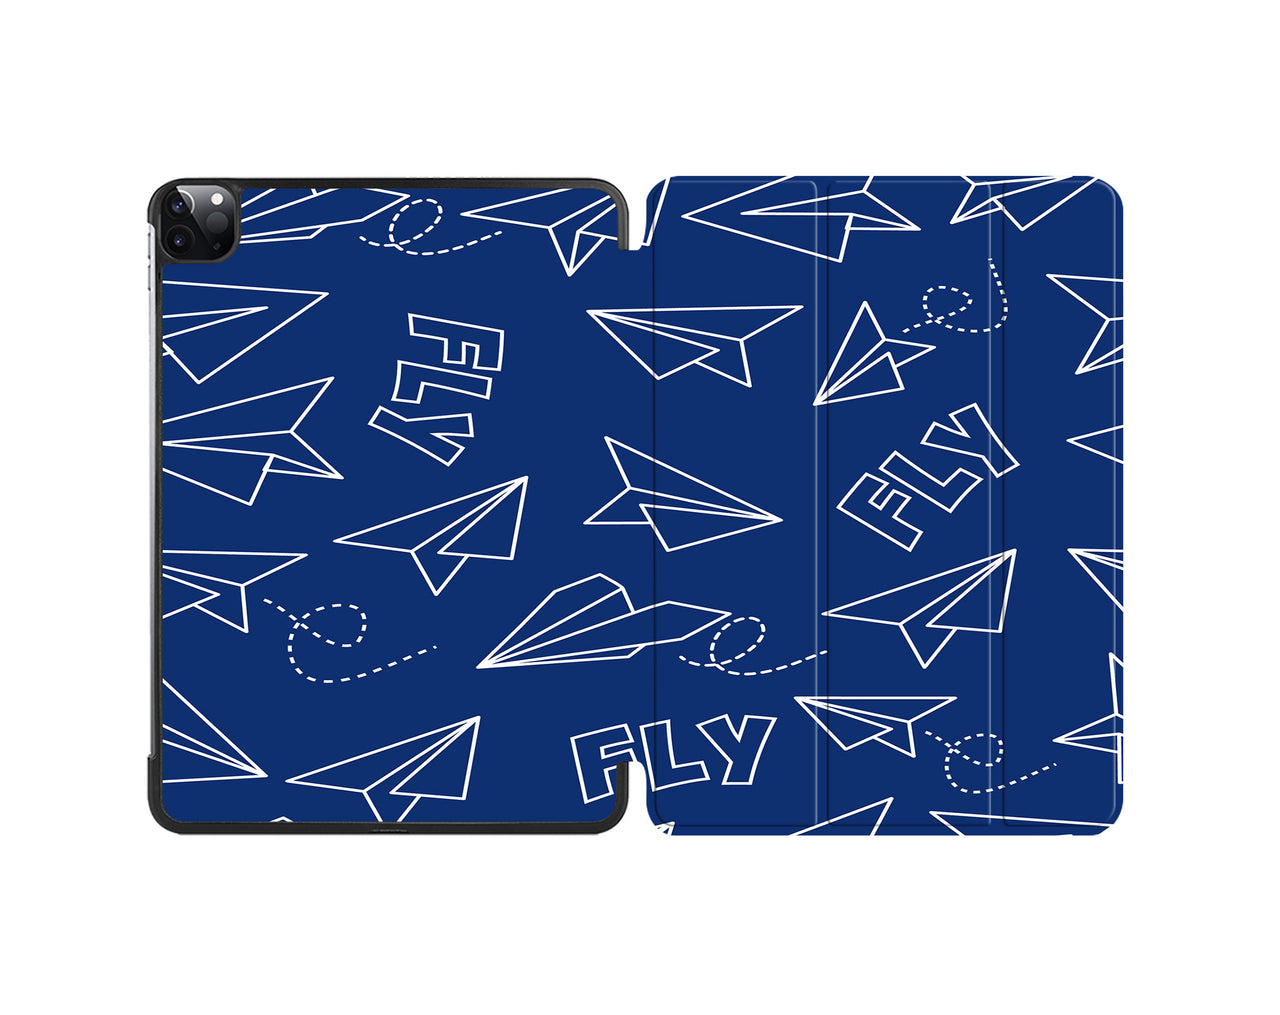 Paper Airplane & Fly (Blue) Designed iPad Cases